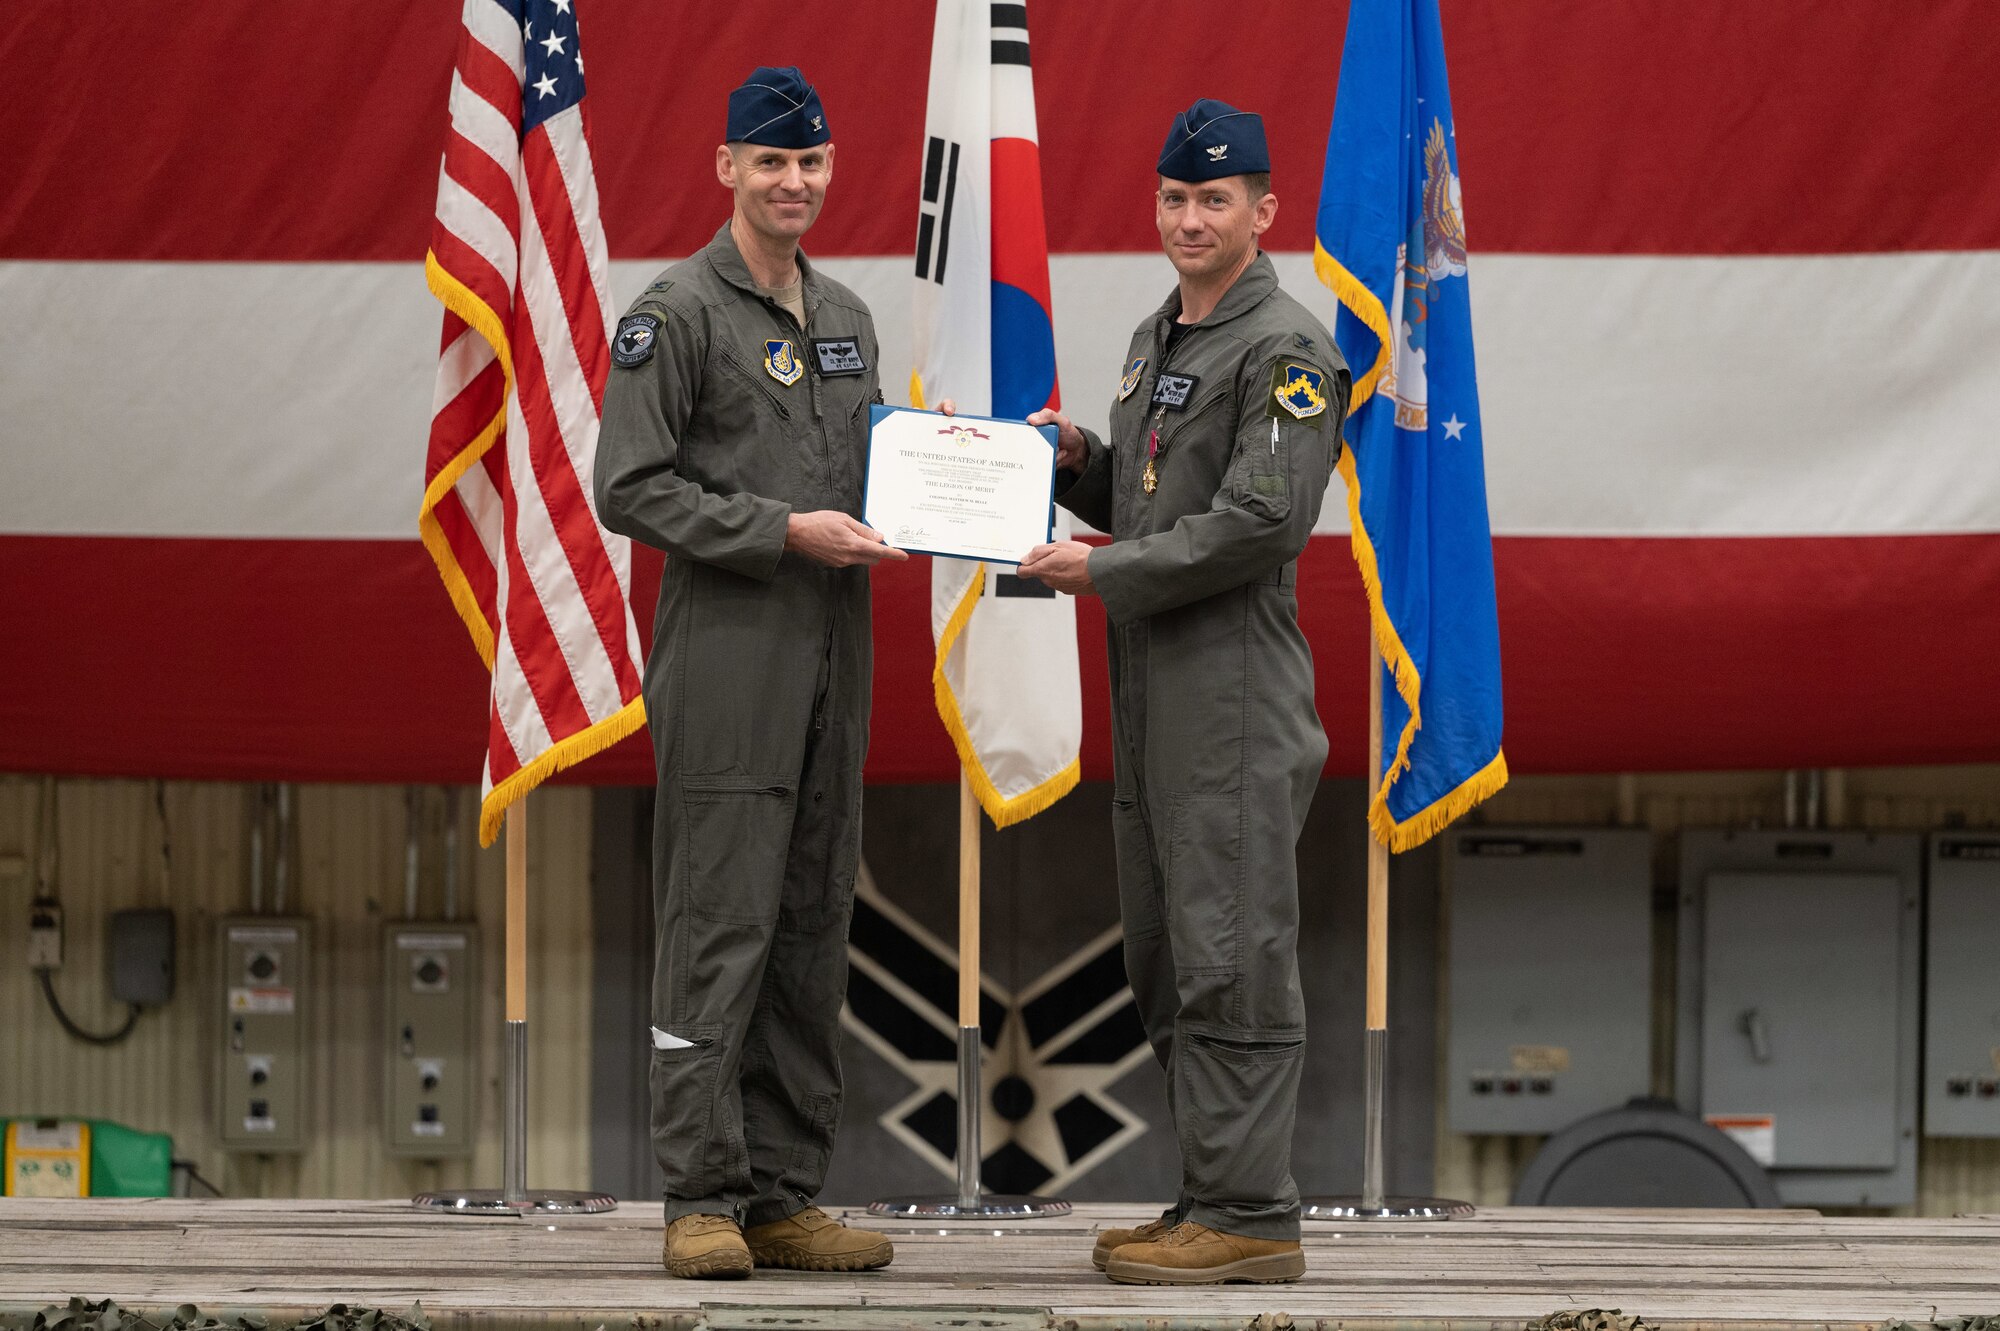 Col. Timothy B. Murphy, left, 8th Fighter Wing commander, holds a decoration awarded to Col. Matthew Belle, 8th Operations Group outgoing commander, during a change of command ceremony at Kunsan Air Base, Republic of Korea, June 2, 2023. The 8th OG commander is responsible for conventional air-to-ground and air-to-air missions in support of armistice and wartime taskings to defend the Republic of Korea. (U.S. Air Force photo by Staff Sgt. Sadie Colbert)